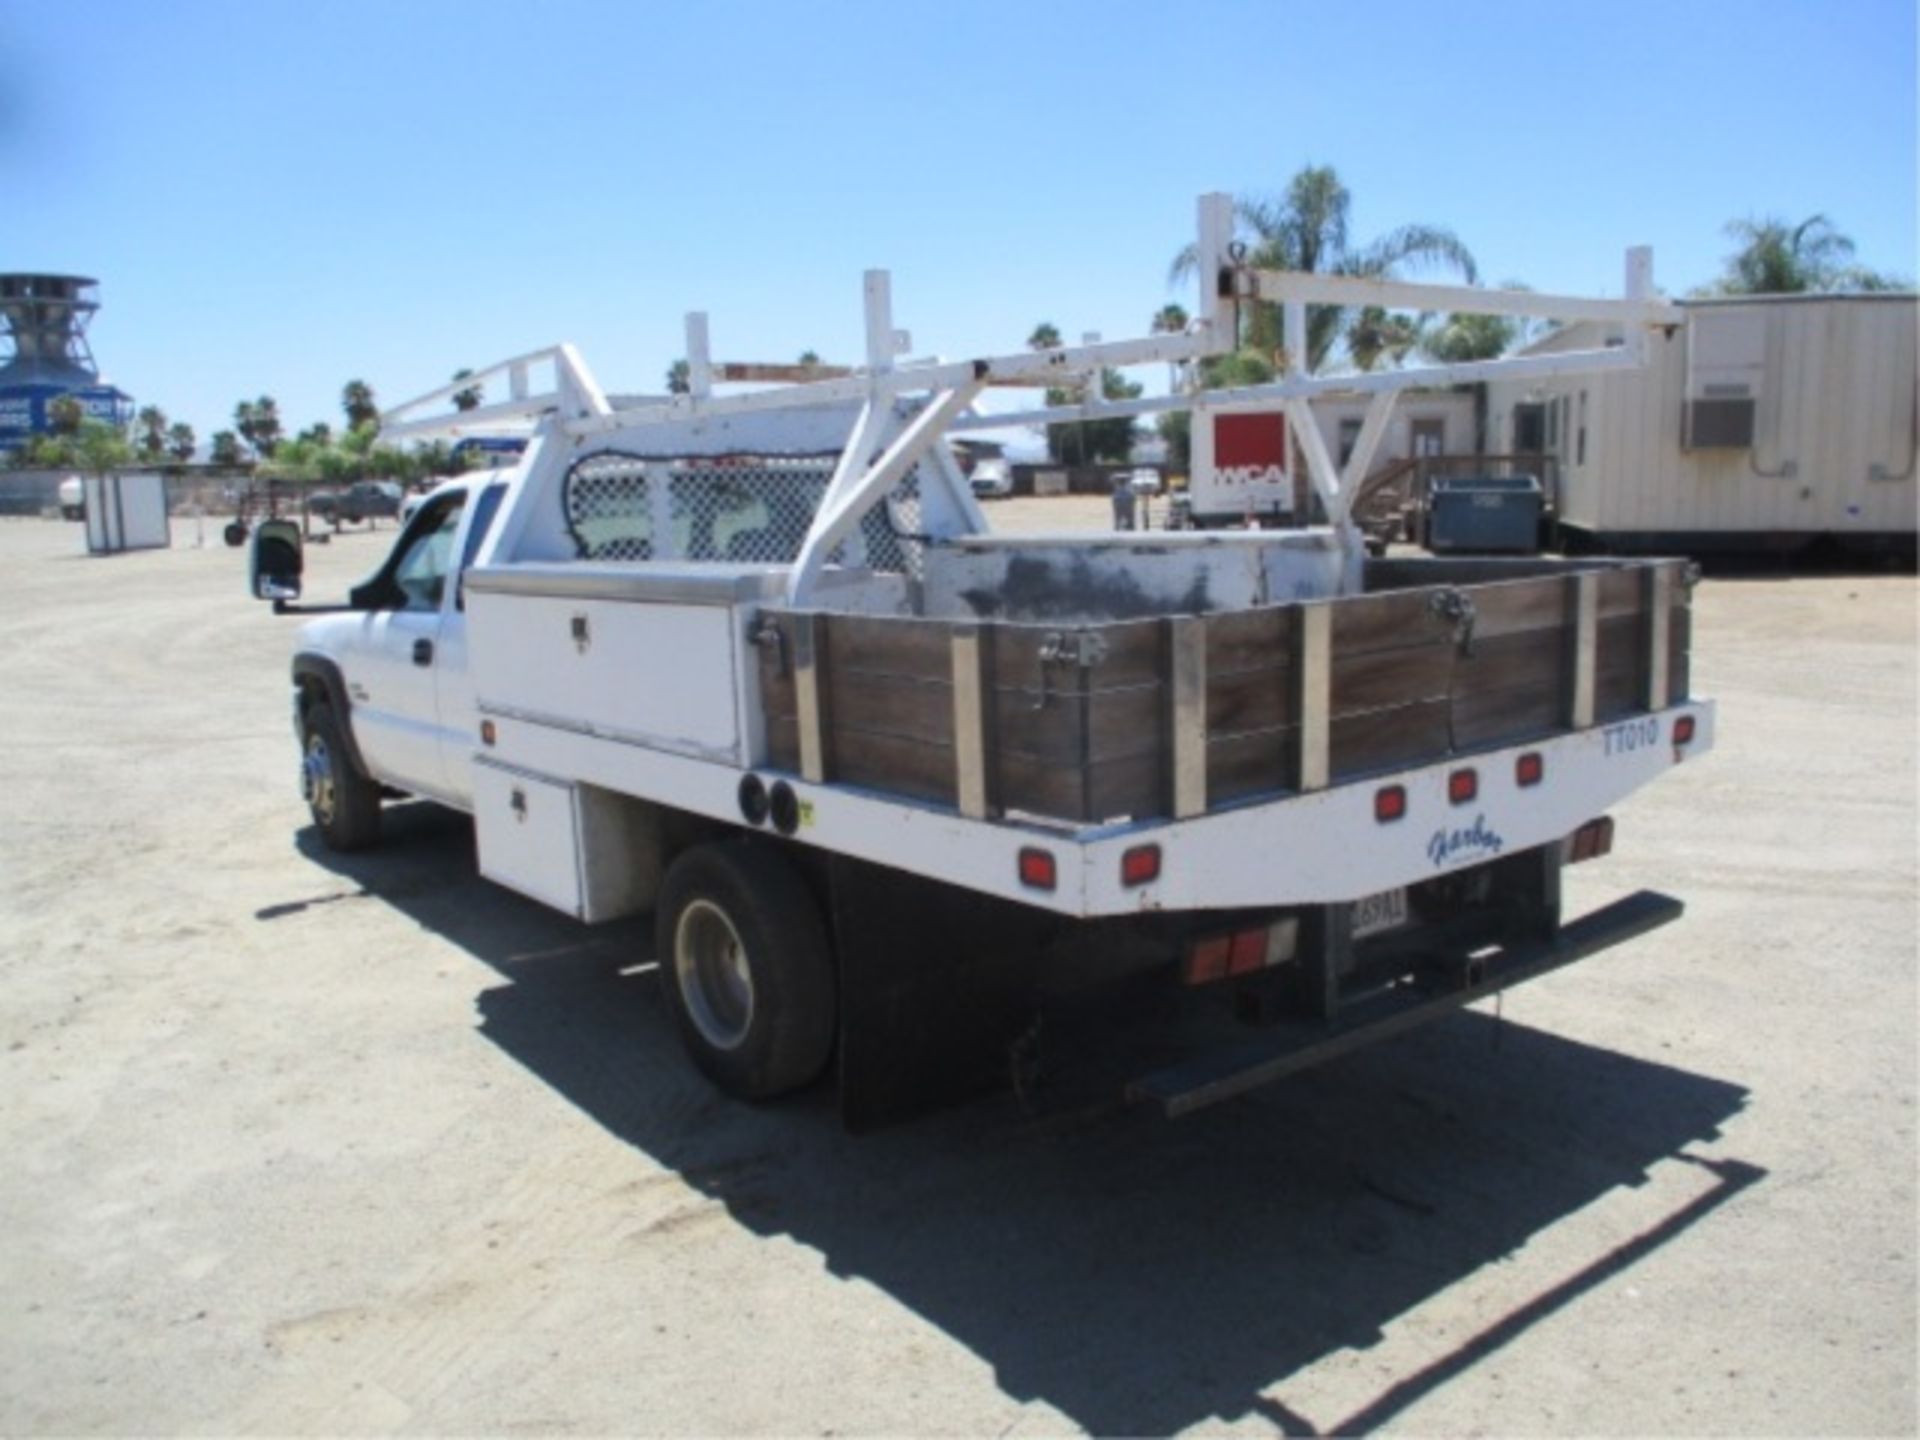 2006 Chevrolet 3500 Extended-Cab Utility Truck, 6.6L Turbo Diesel, Automatic, Tool Boxes, Lumber - Image 22 of 71